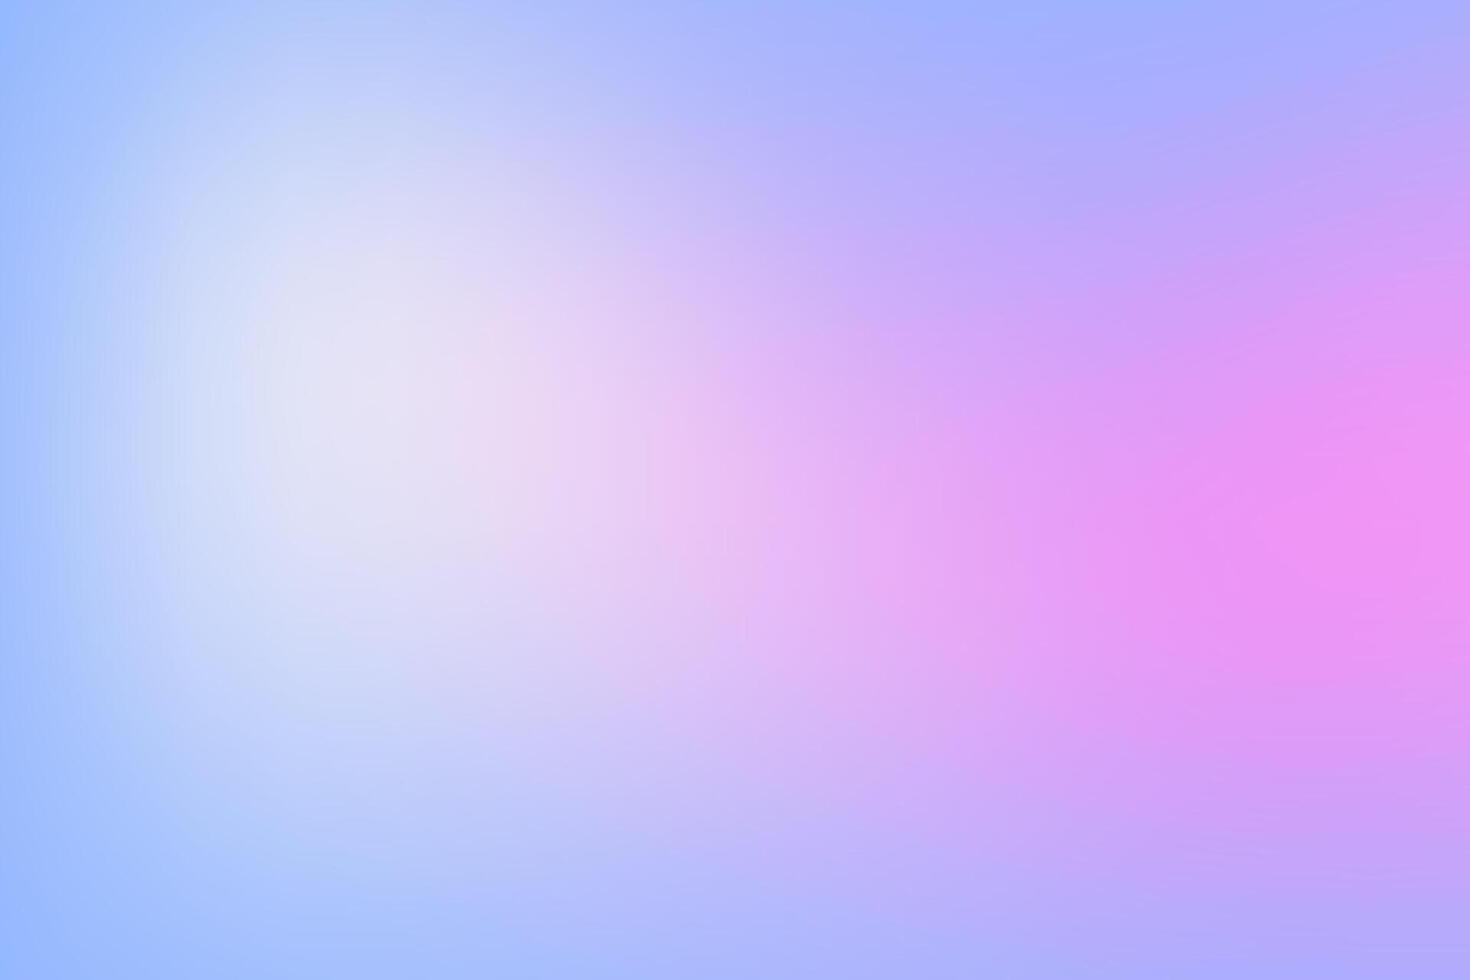 Colorful Abstract Blur Gradient Background Design Concept vector